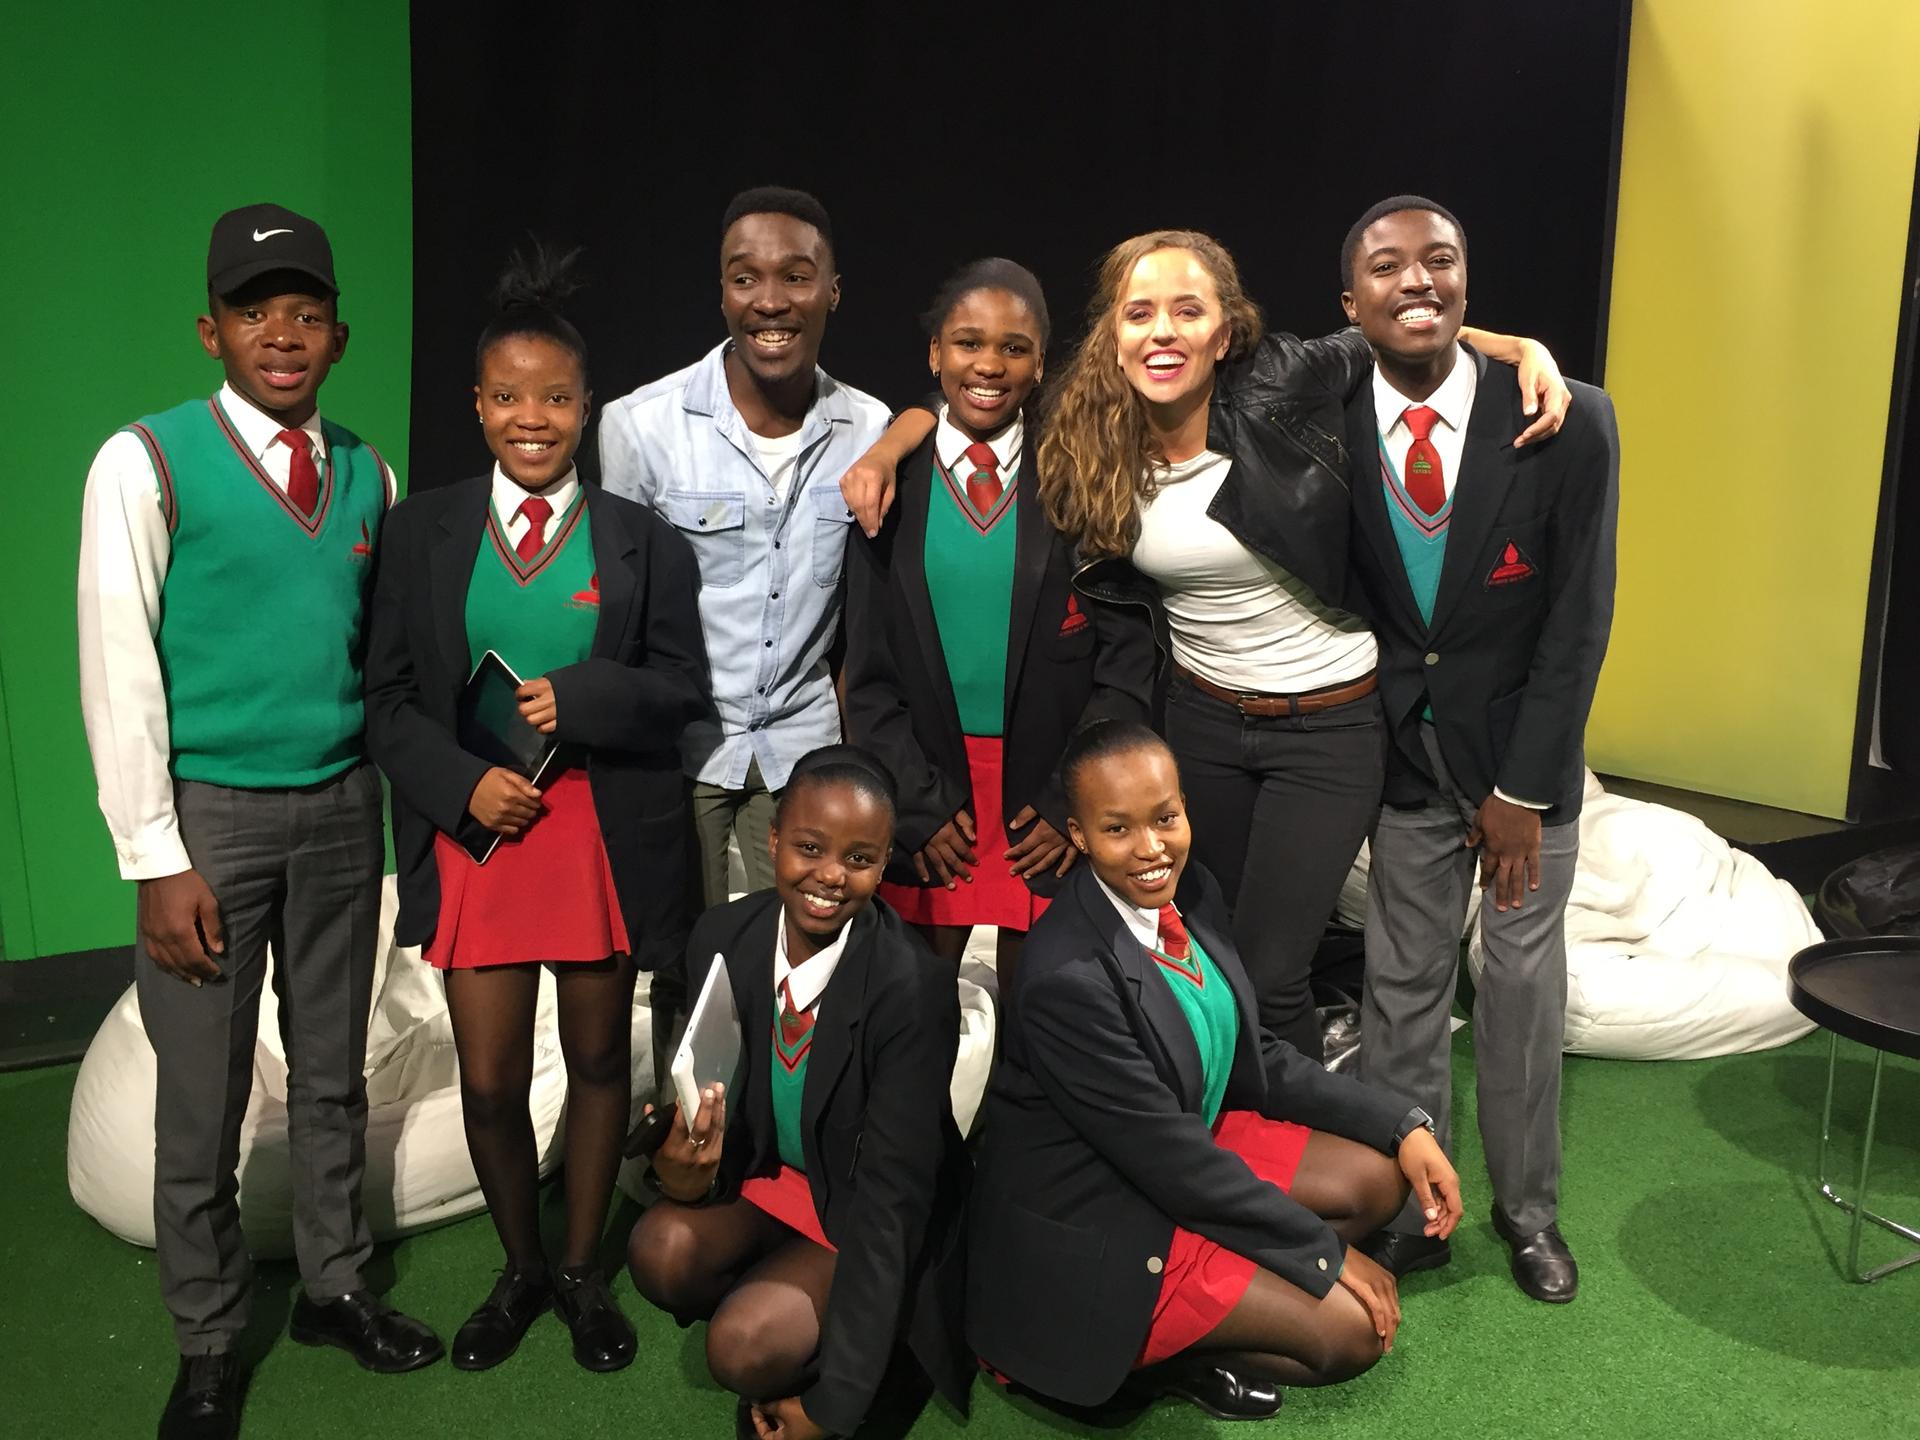 MTV Host Tinashe Venge, center, and Across Women's Lives reporter Jasmine Garsd, second from right, stand with South African students